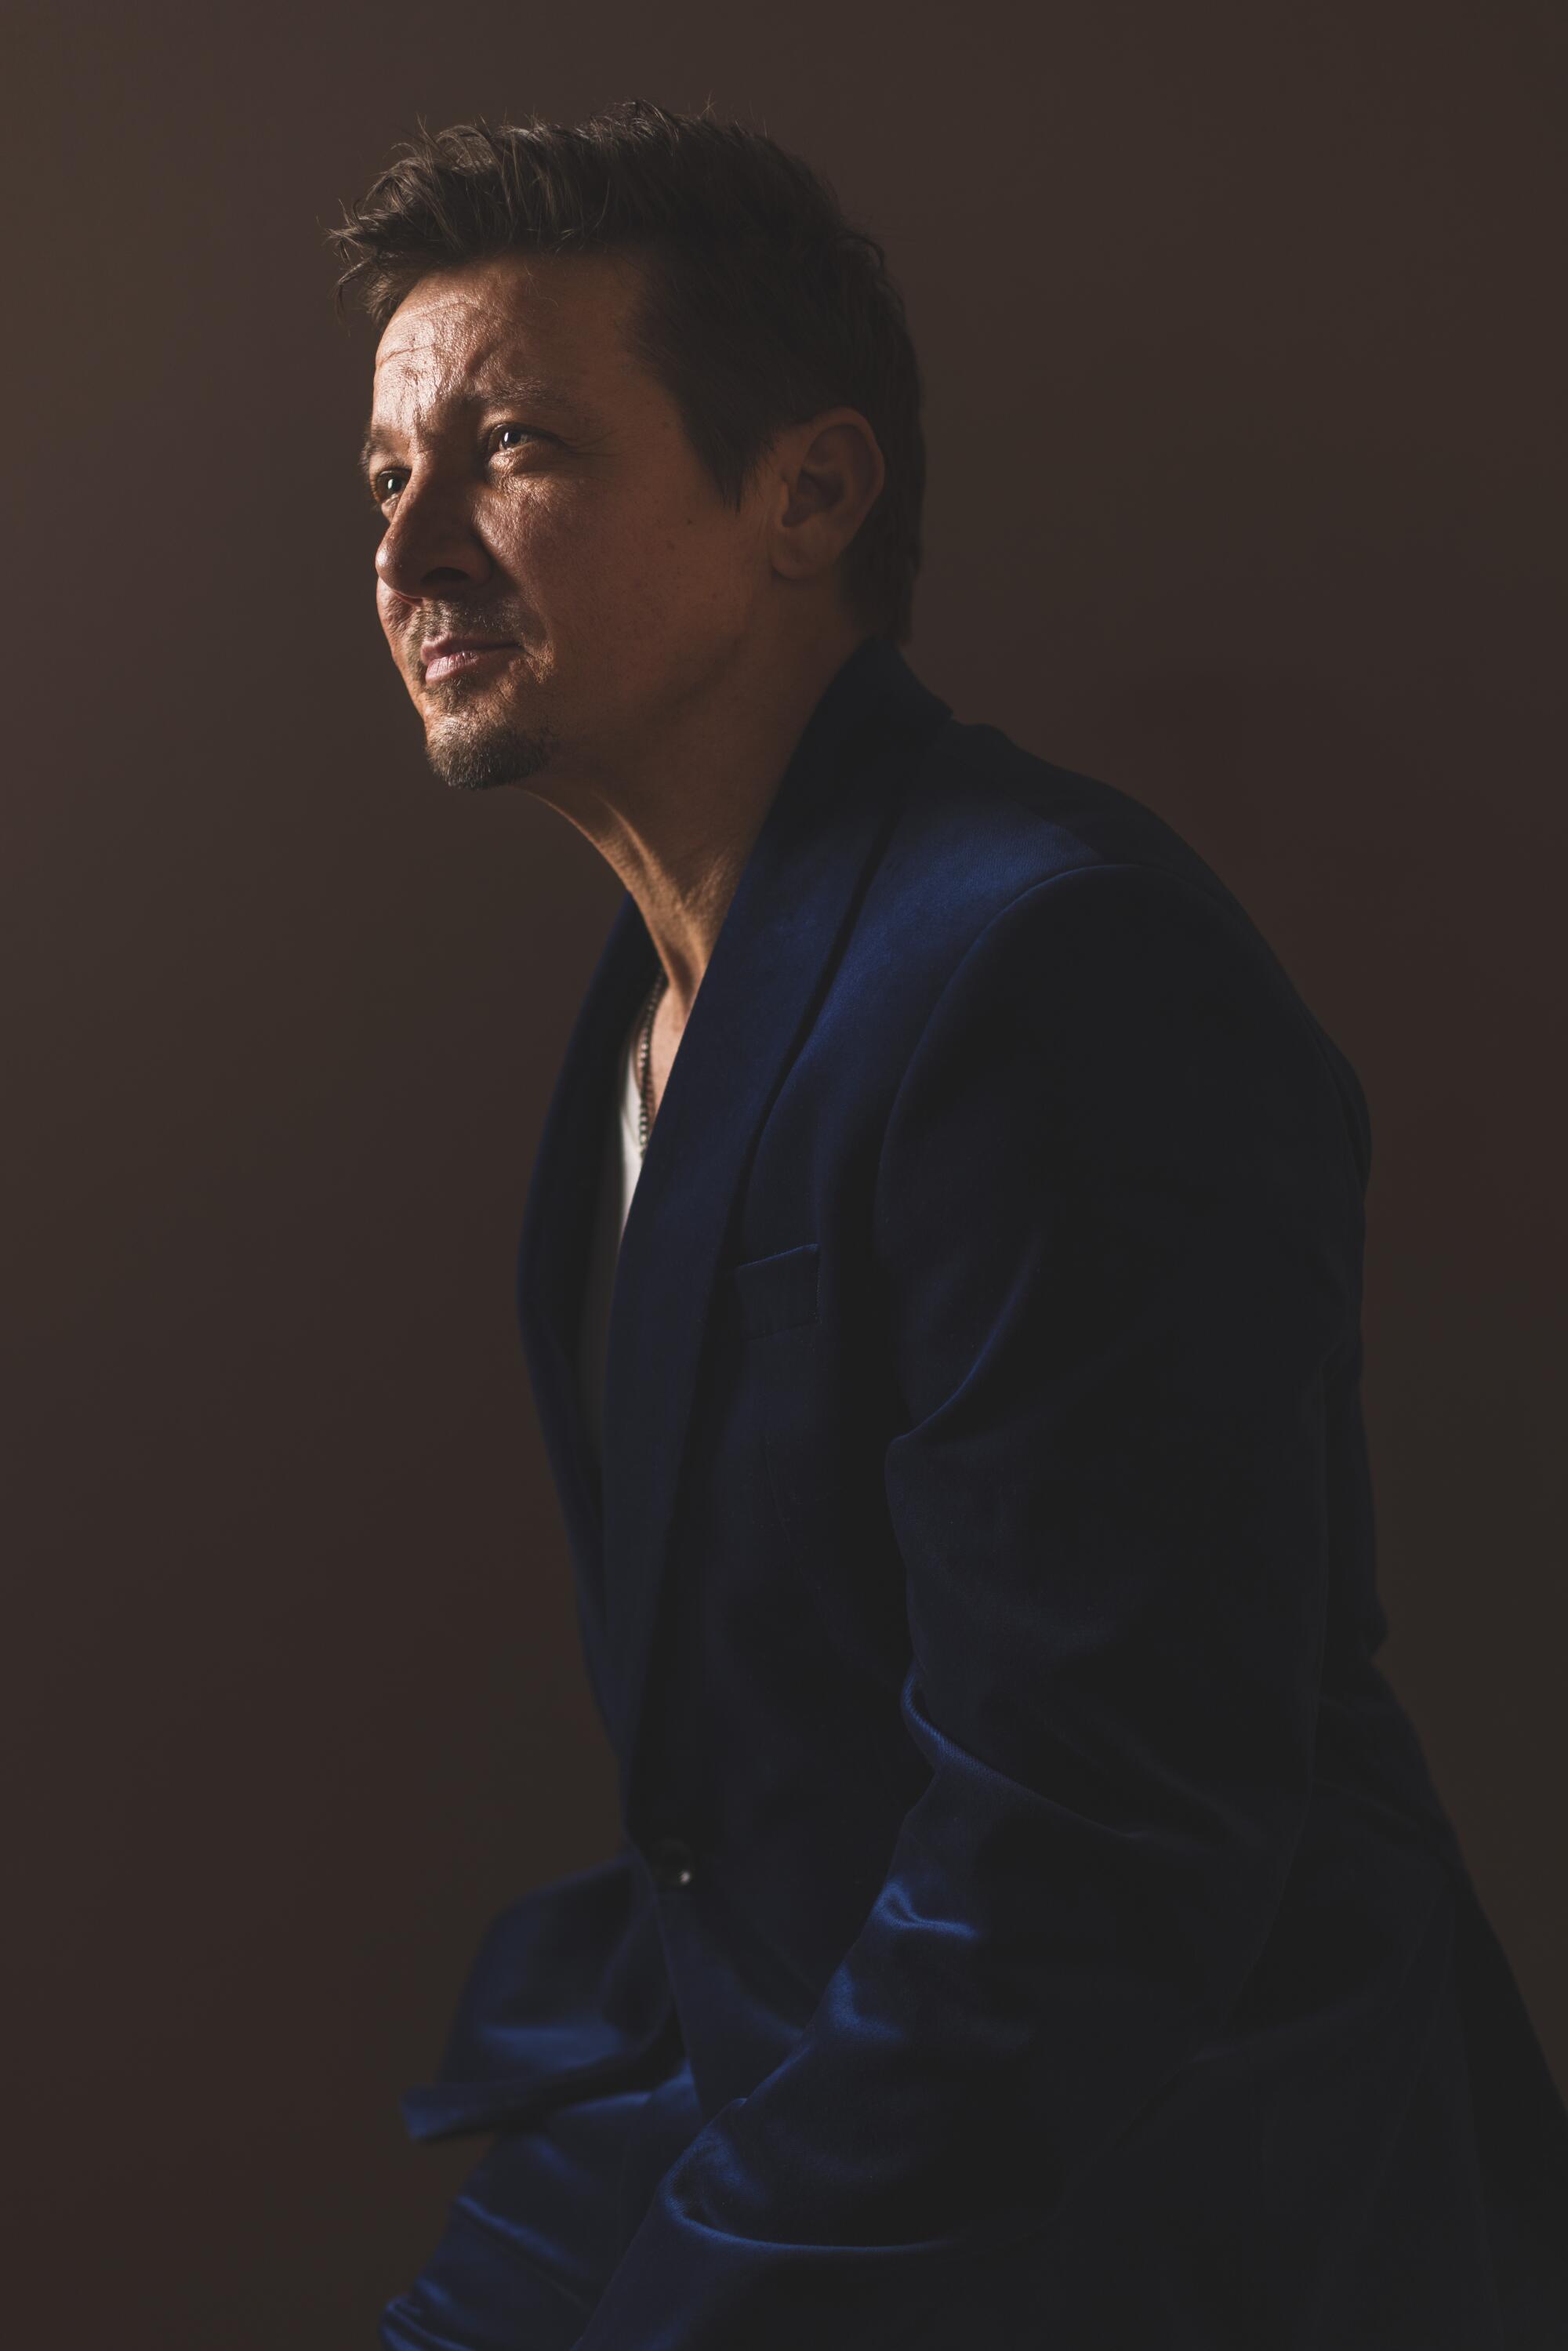 A smiling Jeremy Renner in a dark suit, leaning forward toward a light from above.